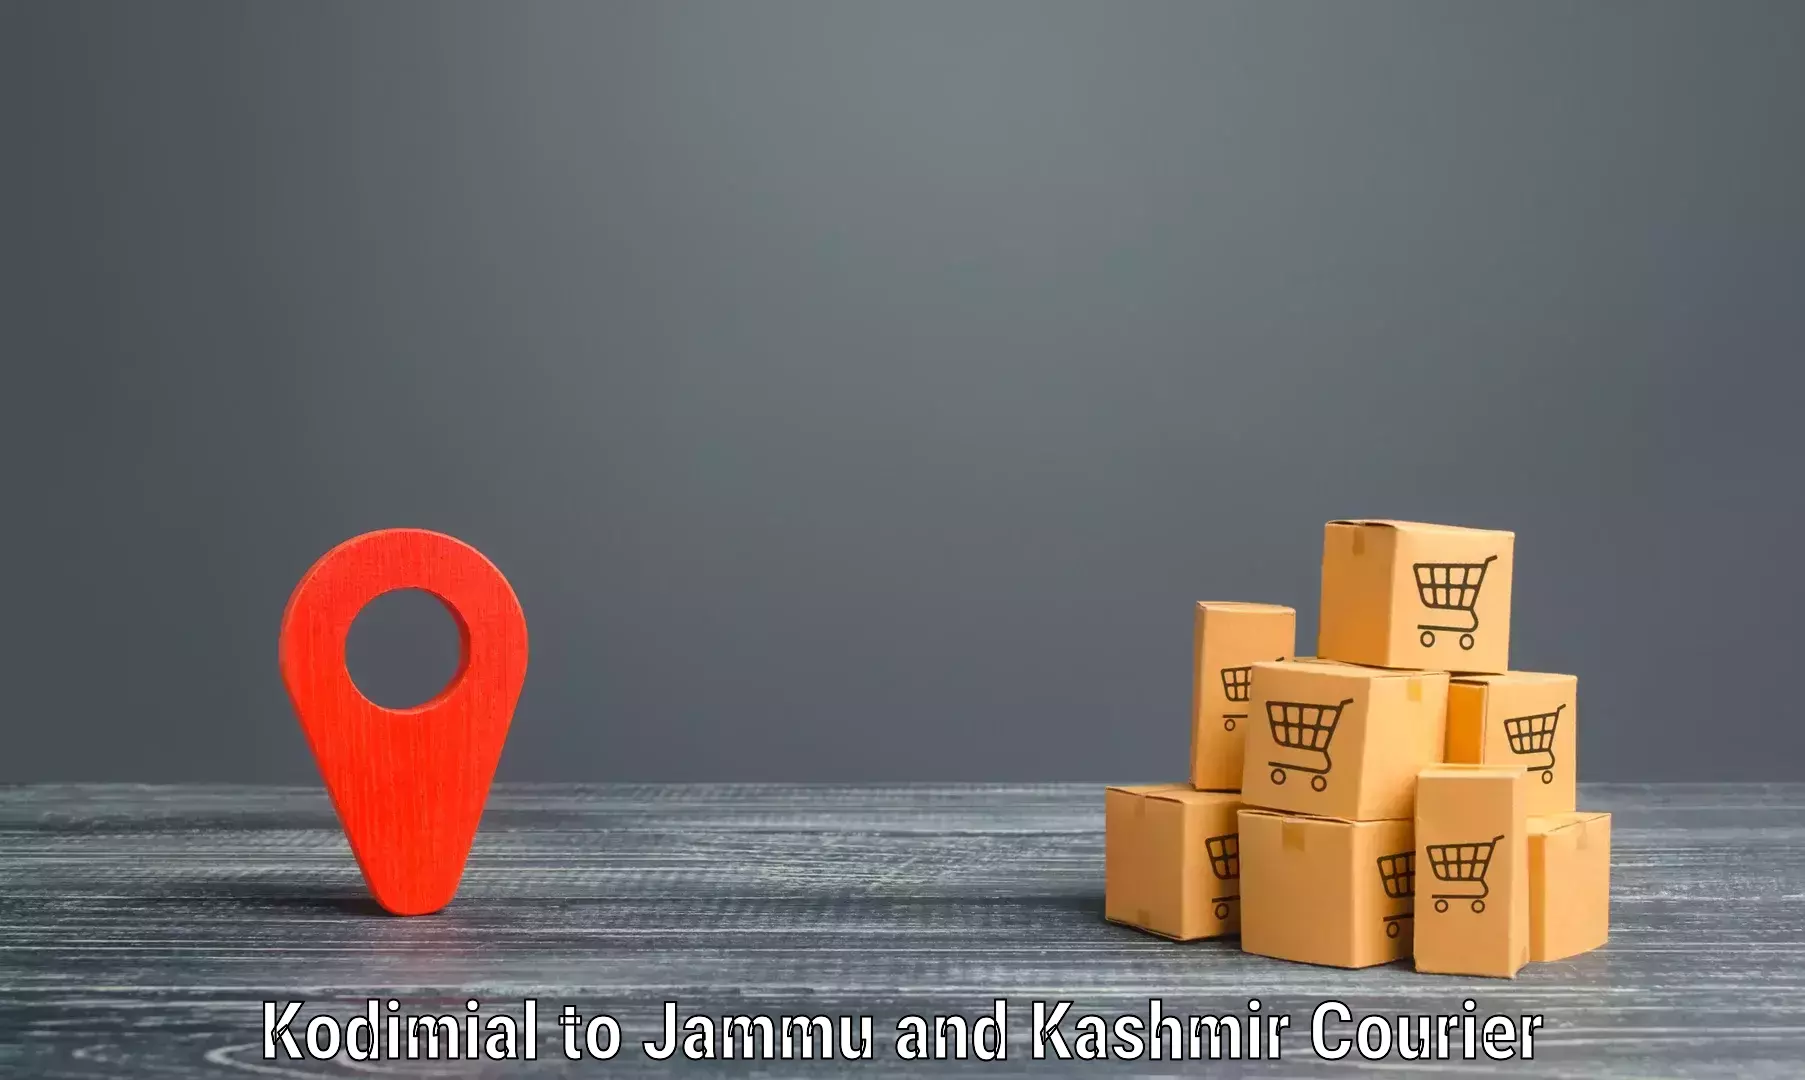 Express delivery network Kodimial to Sopore